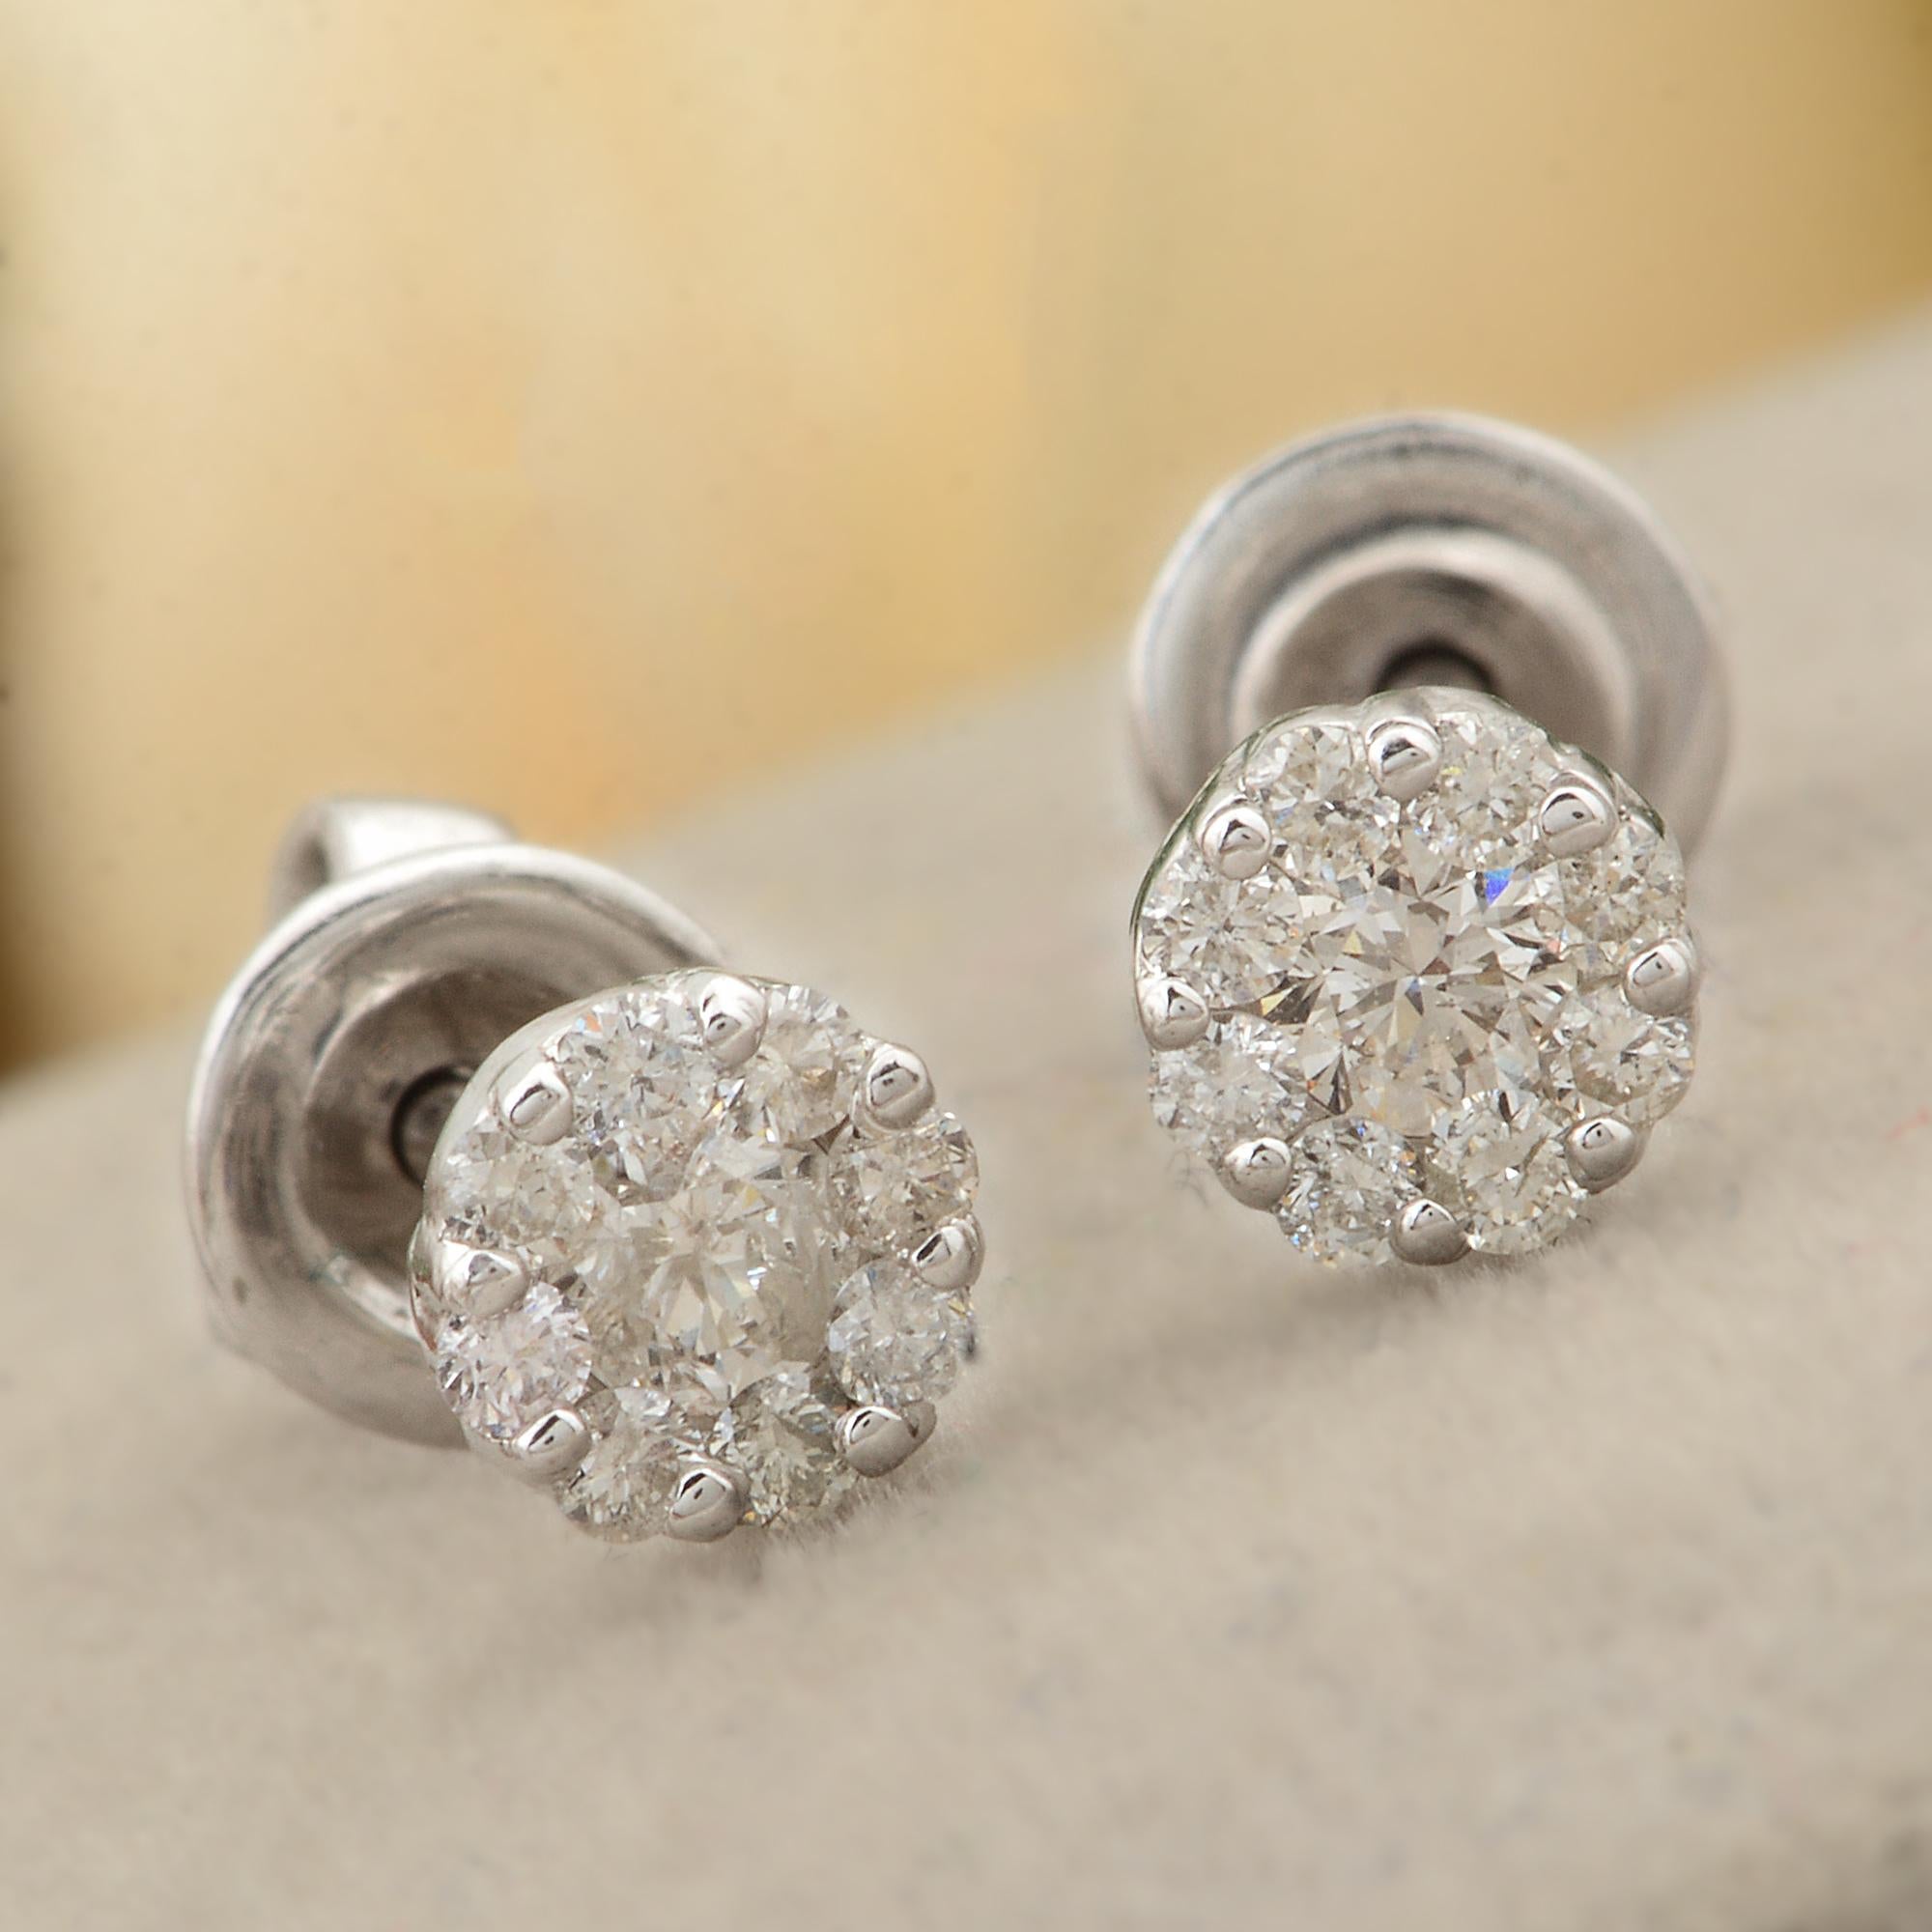 Modern 0.35 Carat SI Clarity HI Color Diamond Pave Stud Earrings 10k White Gold Jewelry For Sale